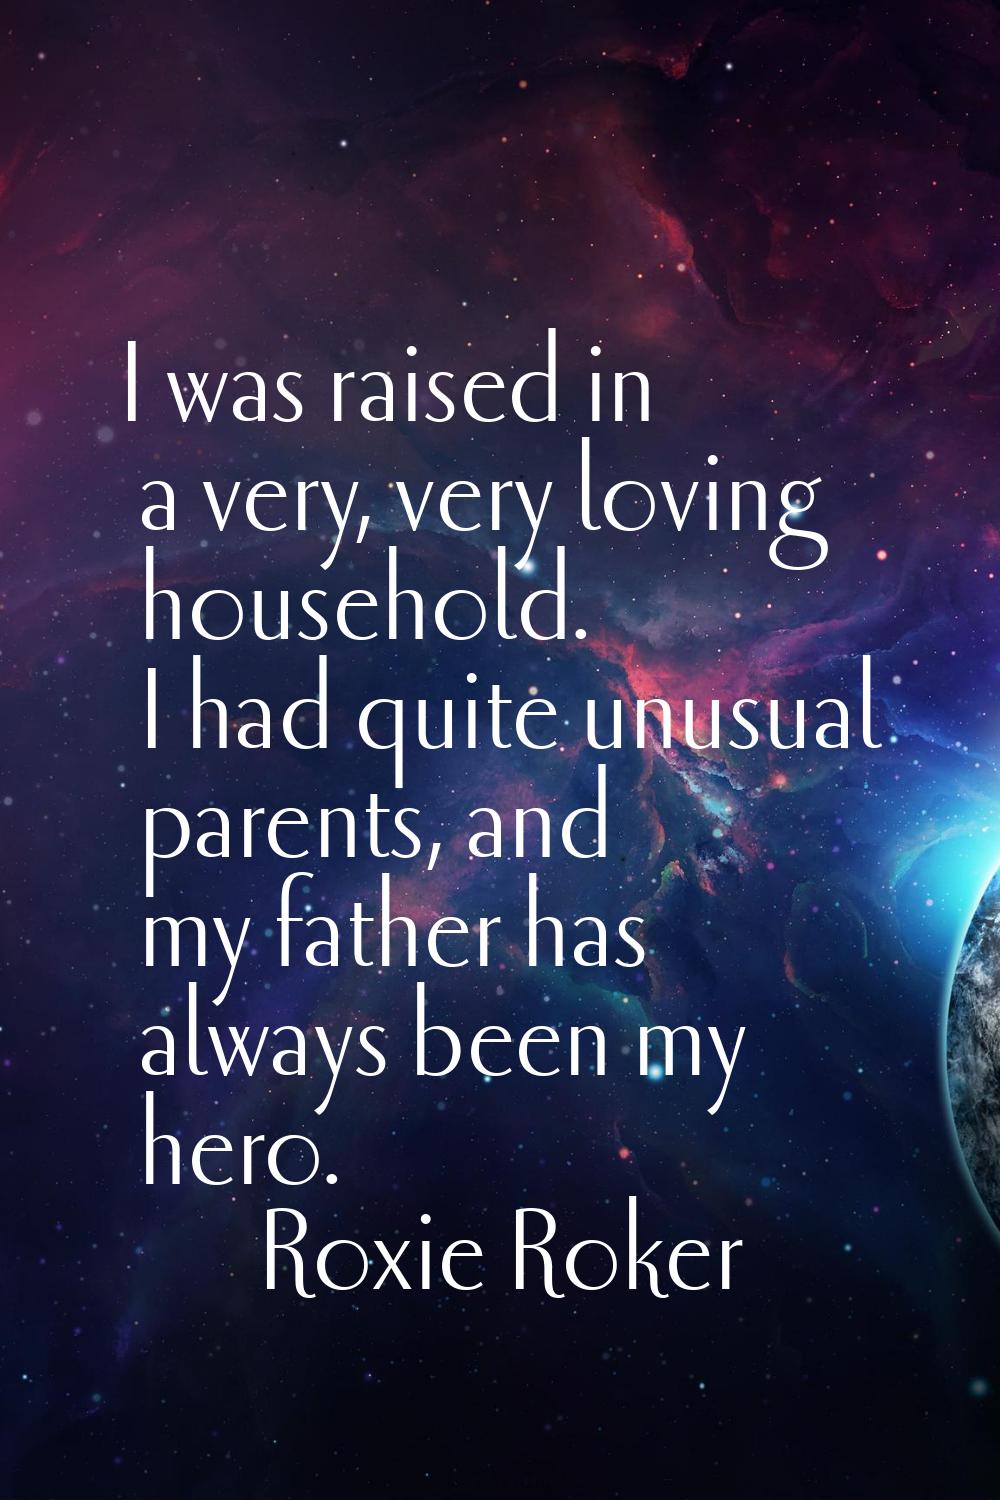 I was raised in a very, very loving household. I had quite unusual parents, and my father has alway